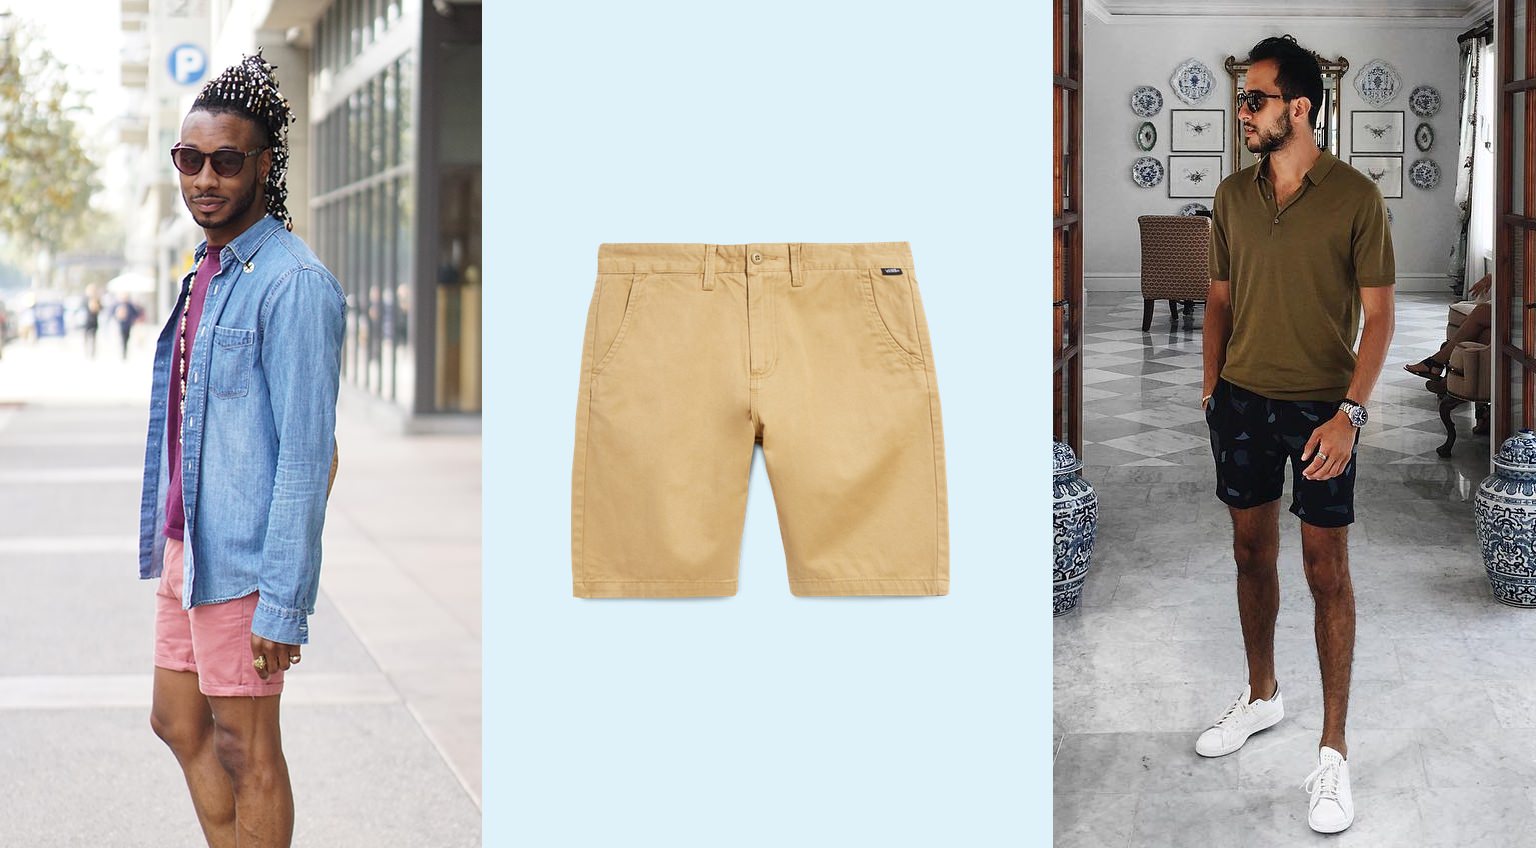 Fashion: The Grown Man's Guide To Wearing Shorts, The Journal